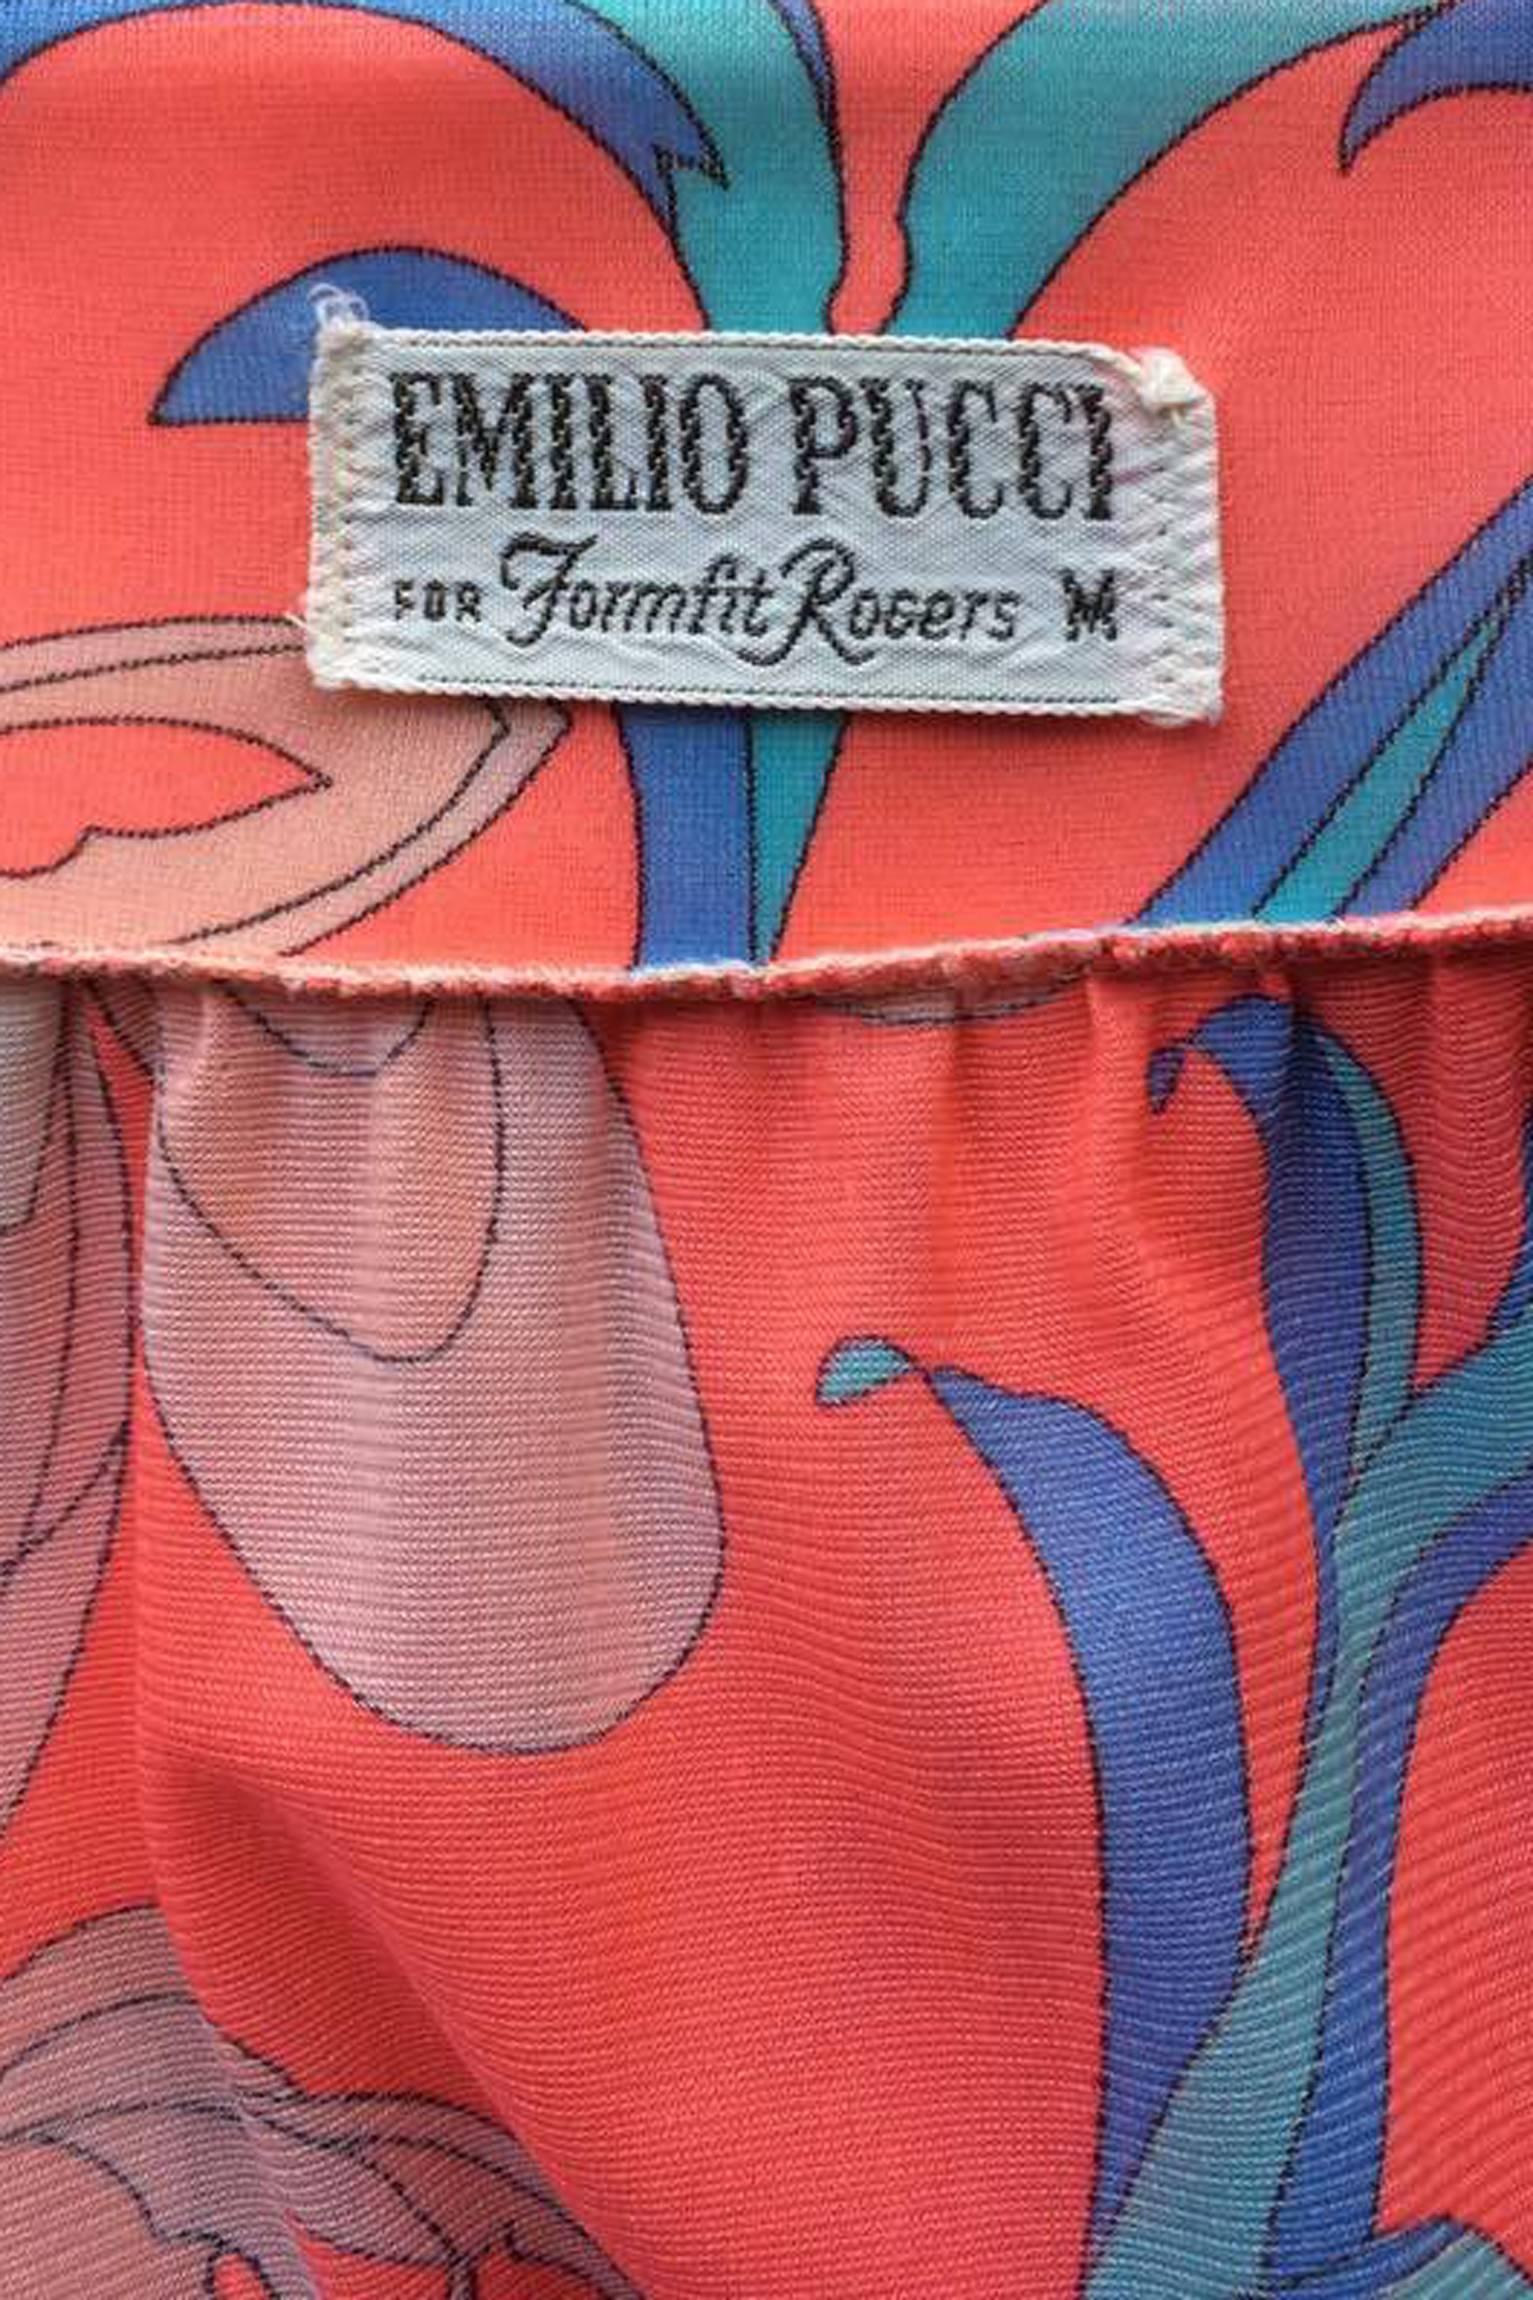 A pink 1970s Emilio Pucci nylon maxi dress with three-quarter length sleeves, a square neckline and an ankle-length a-line skirt. The dress has a large and bright floral prik which is held in a pale pink, blue and brown color scheme.  Along the